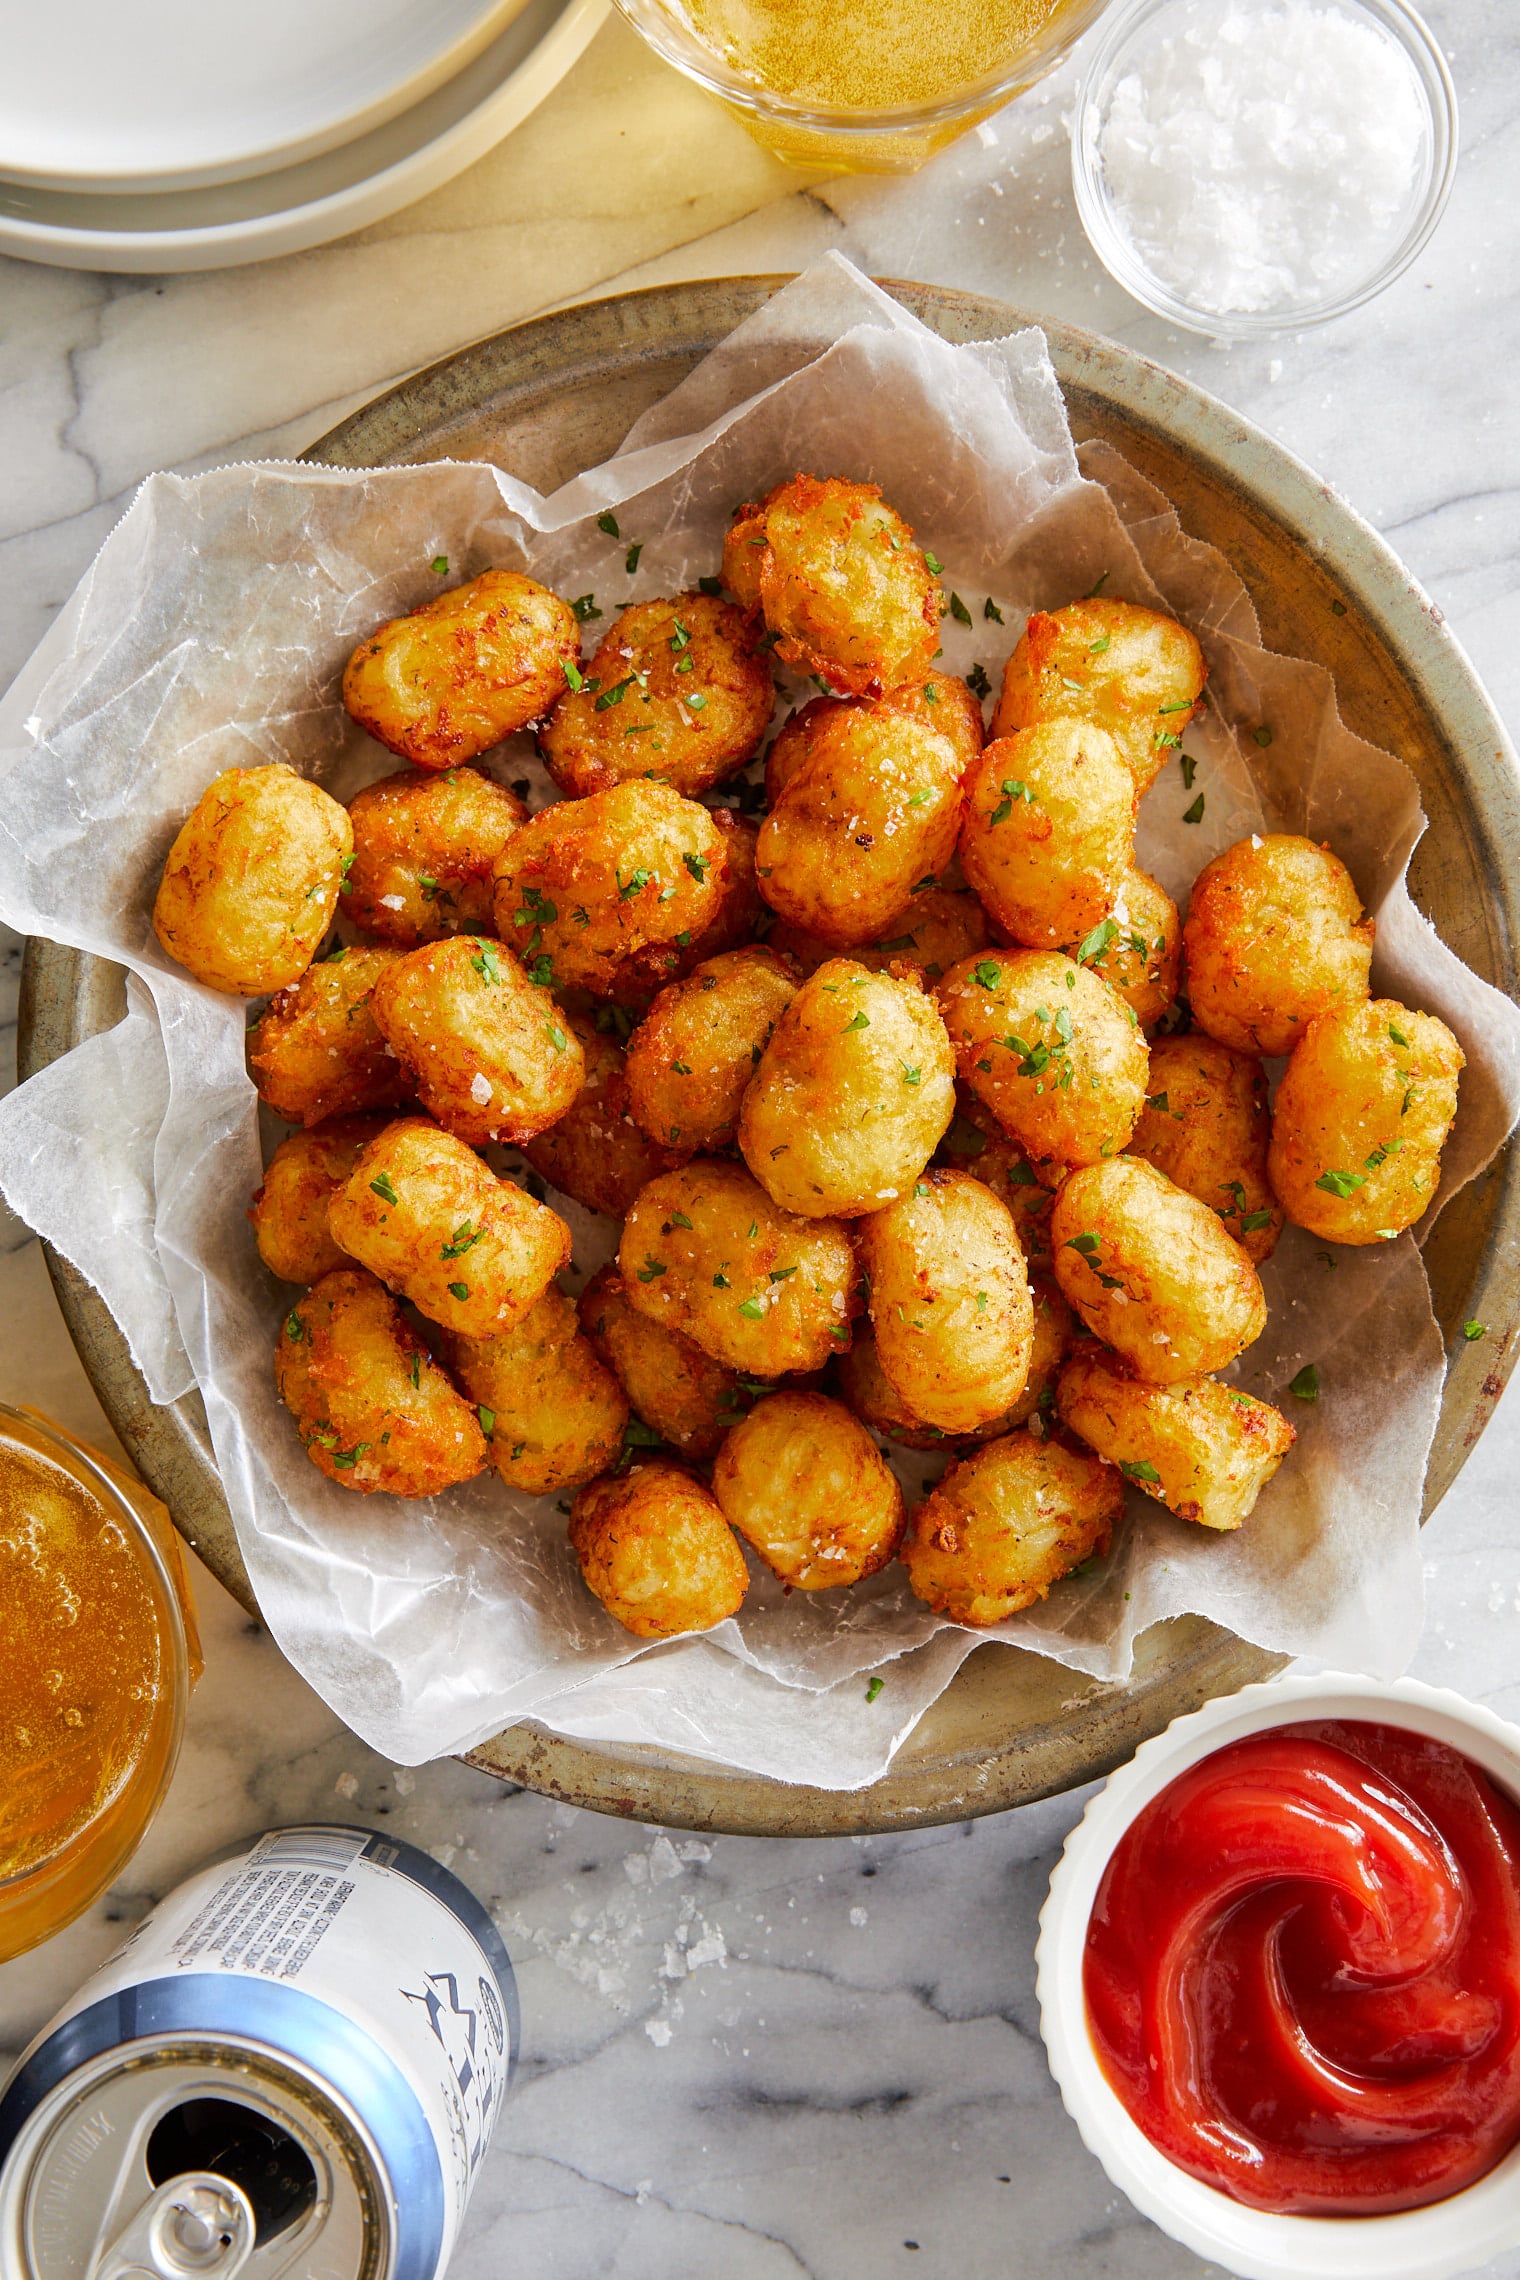 Tater tots in a bowl lined with parchment paper.